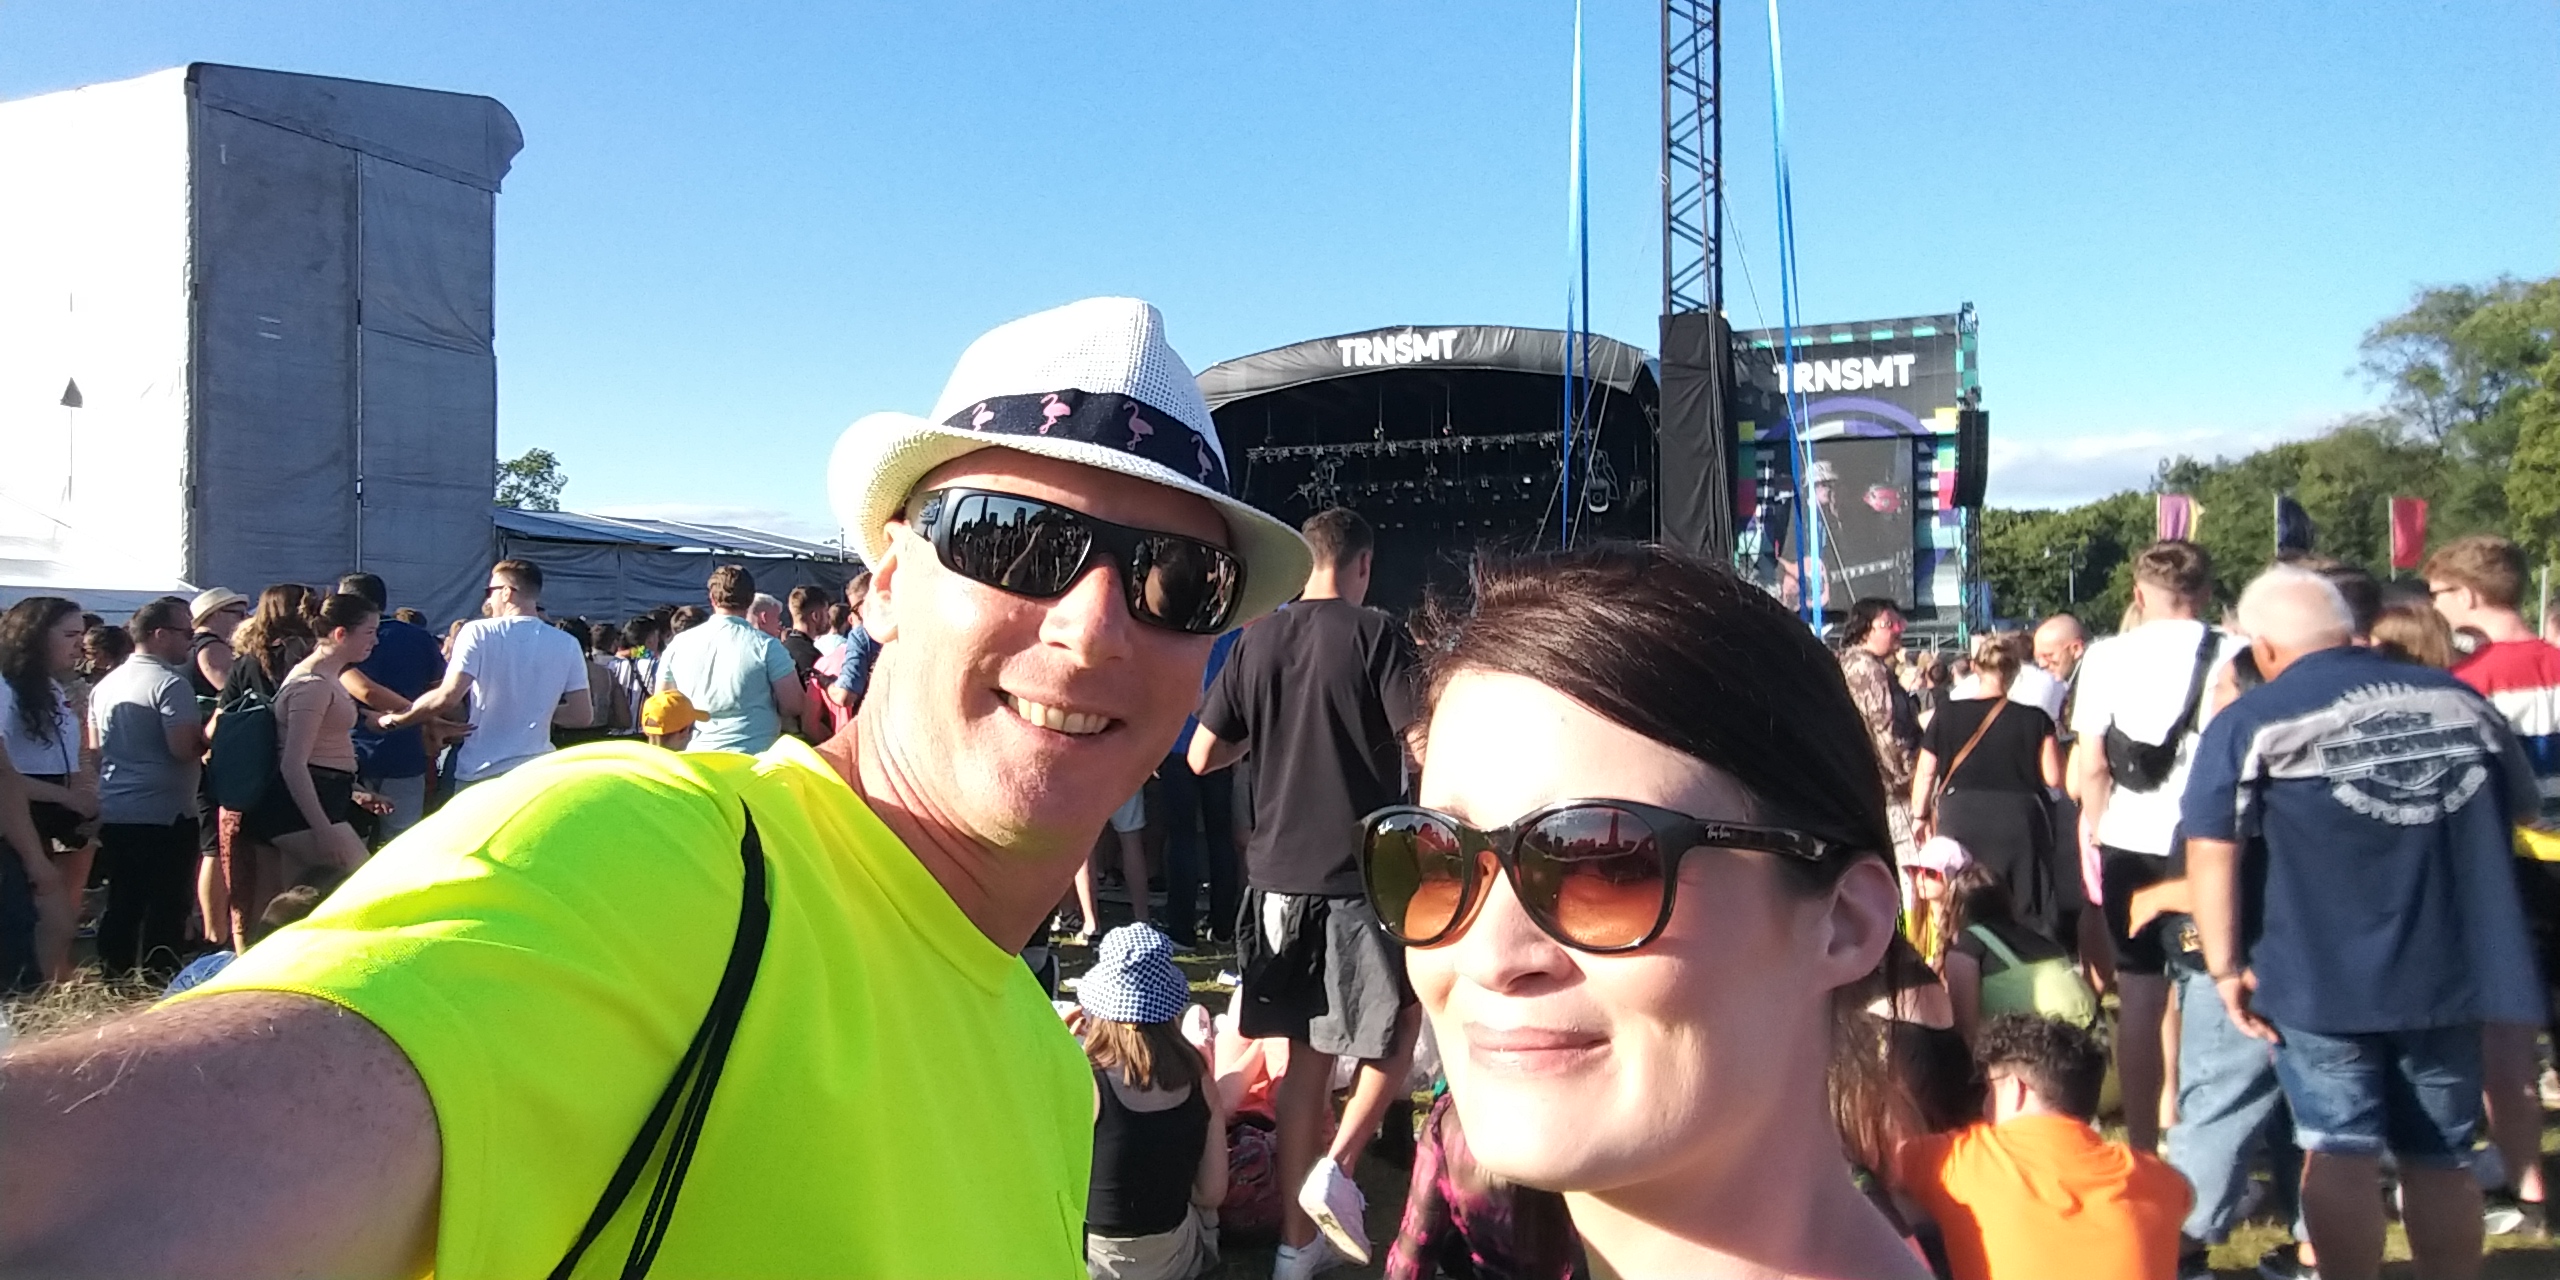 At the main stage of TRNSMT 2019